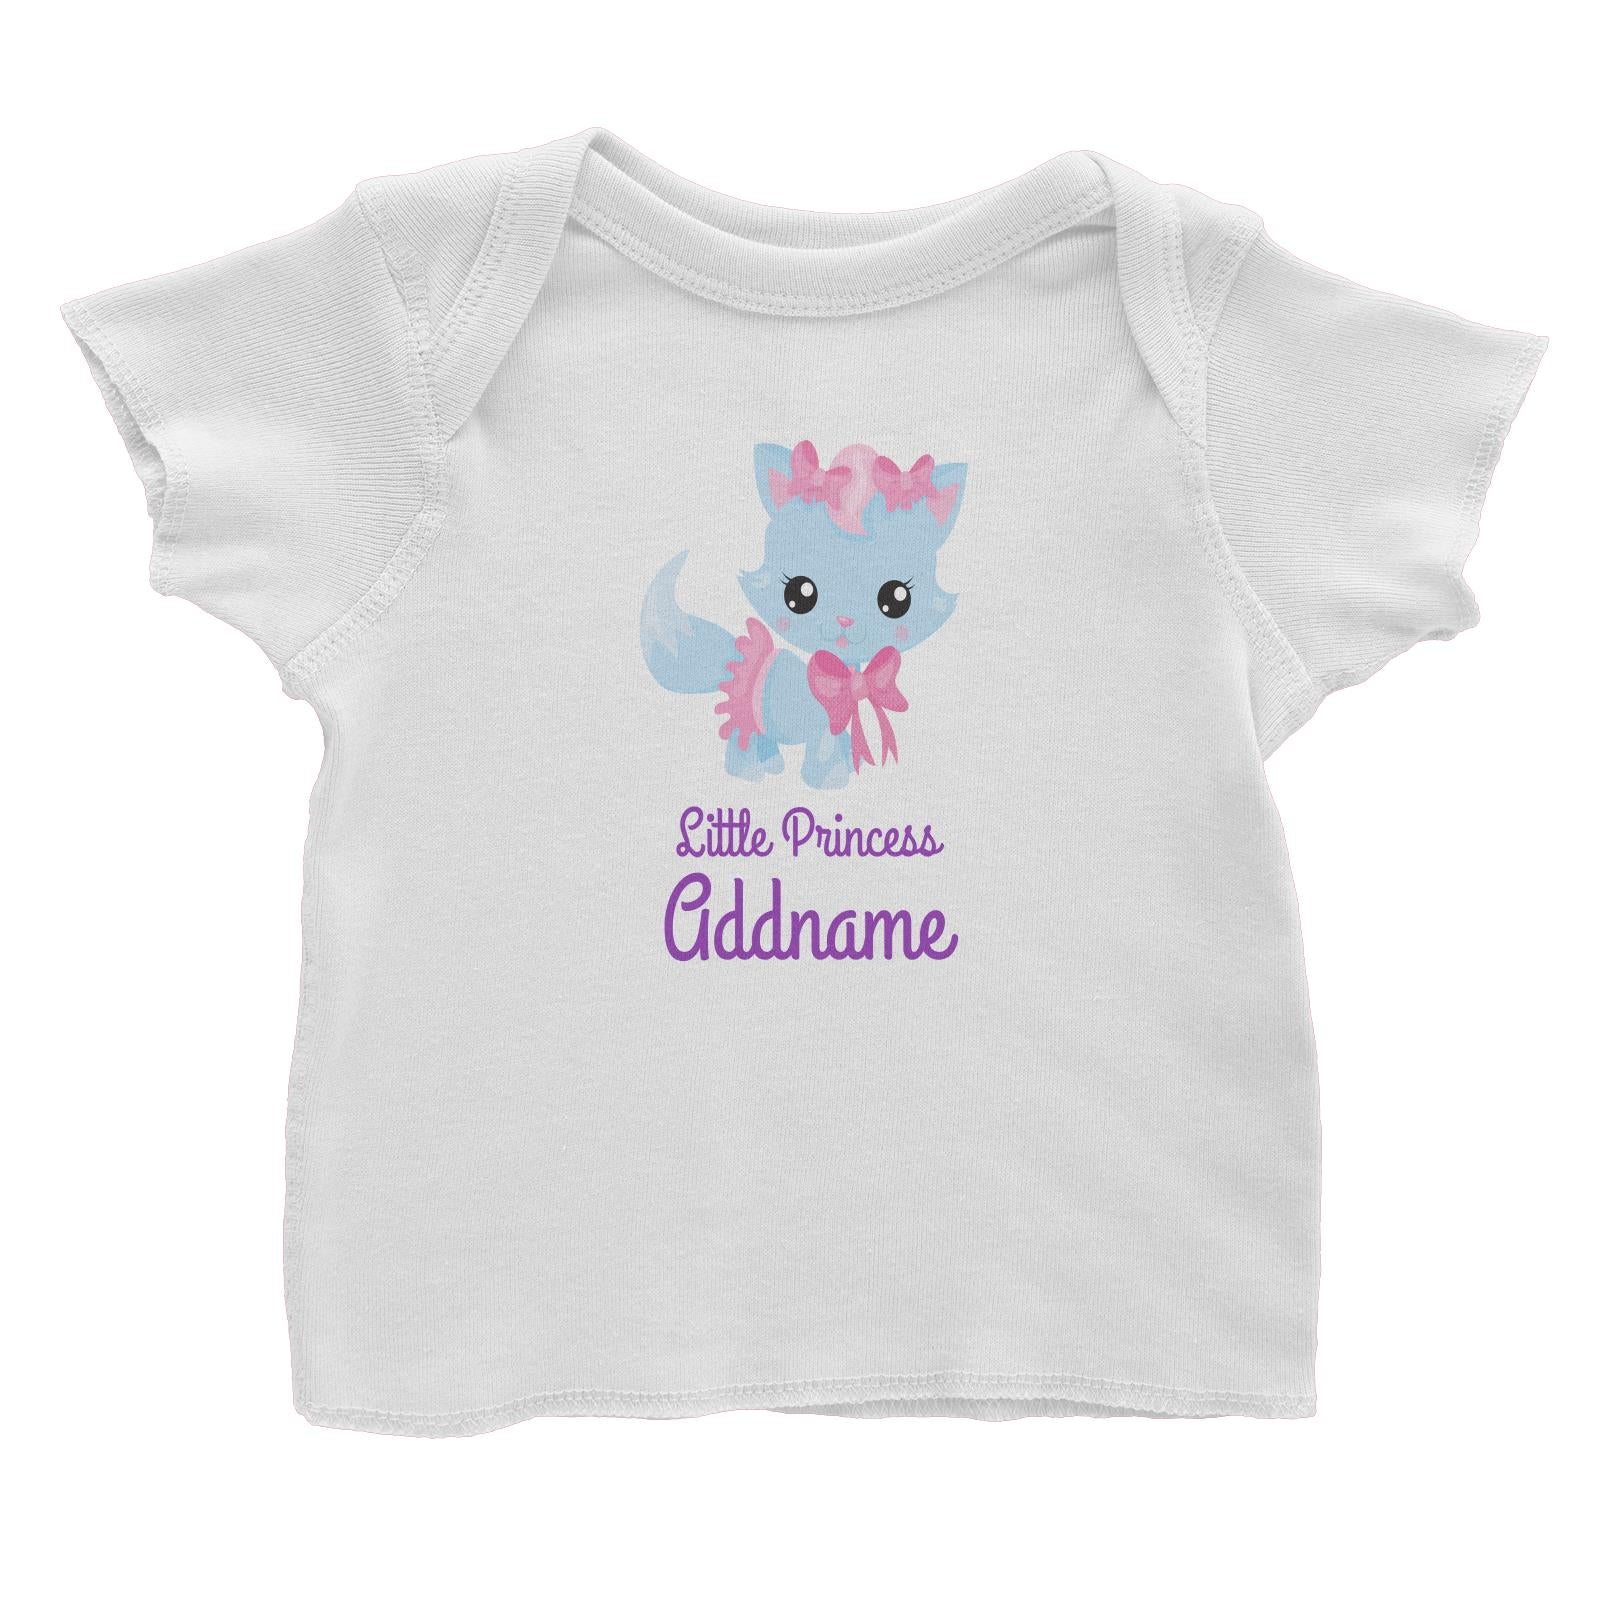 Little Princess Pets Blue Cat with Pink Ribbons Addname Baby T-Shirt